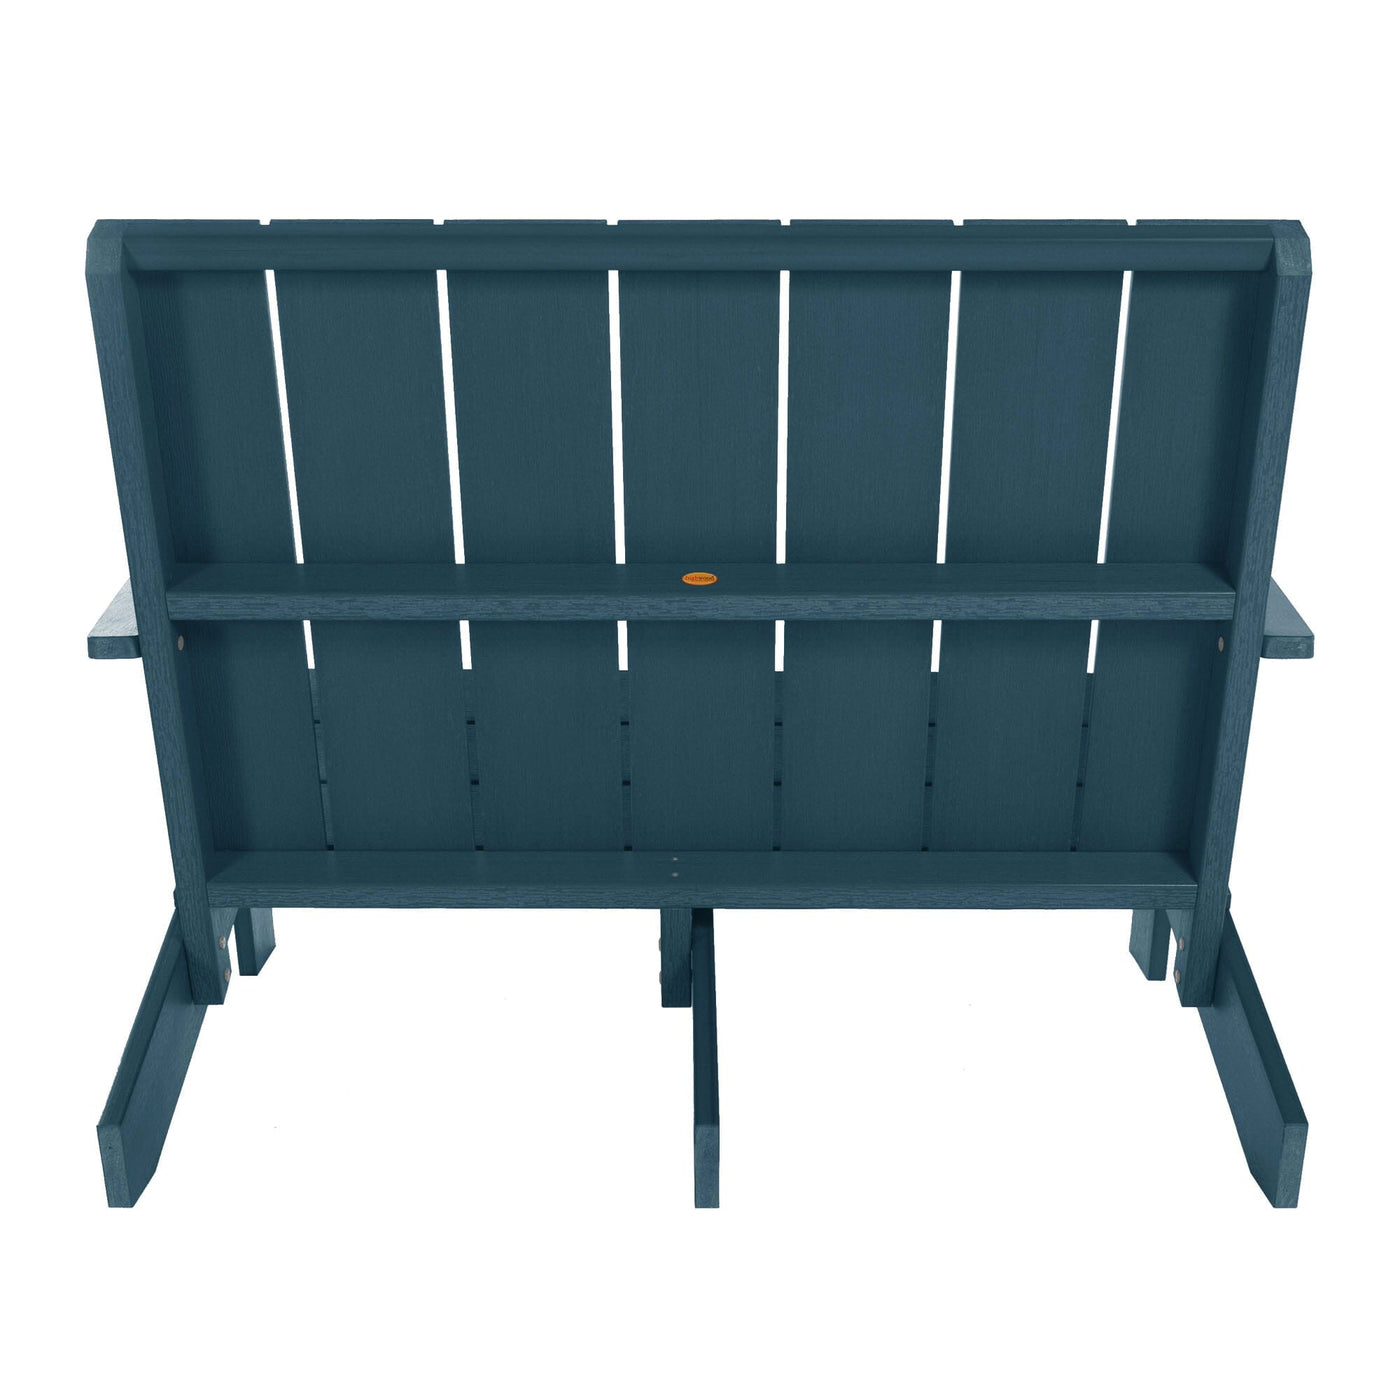 Back view of Italica Modern bench in Nantucket Blue